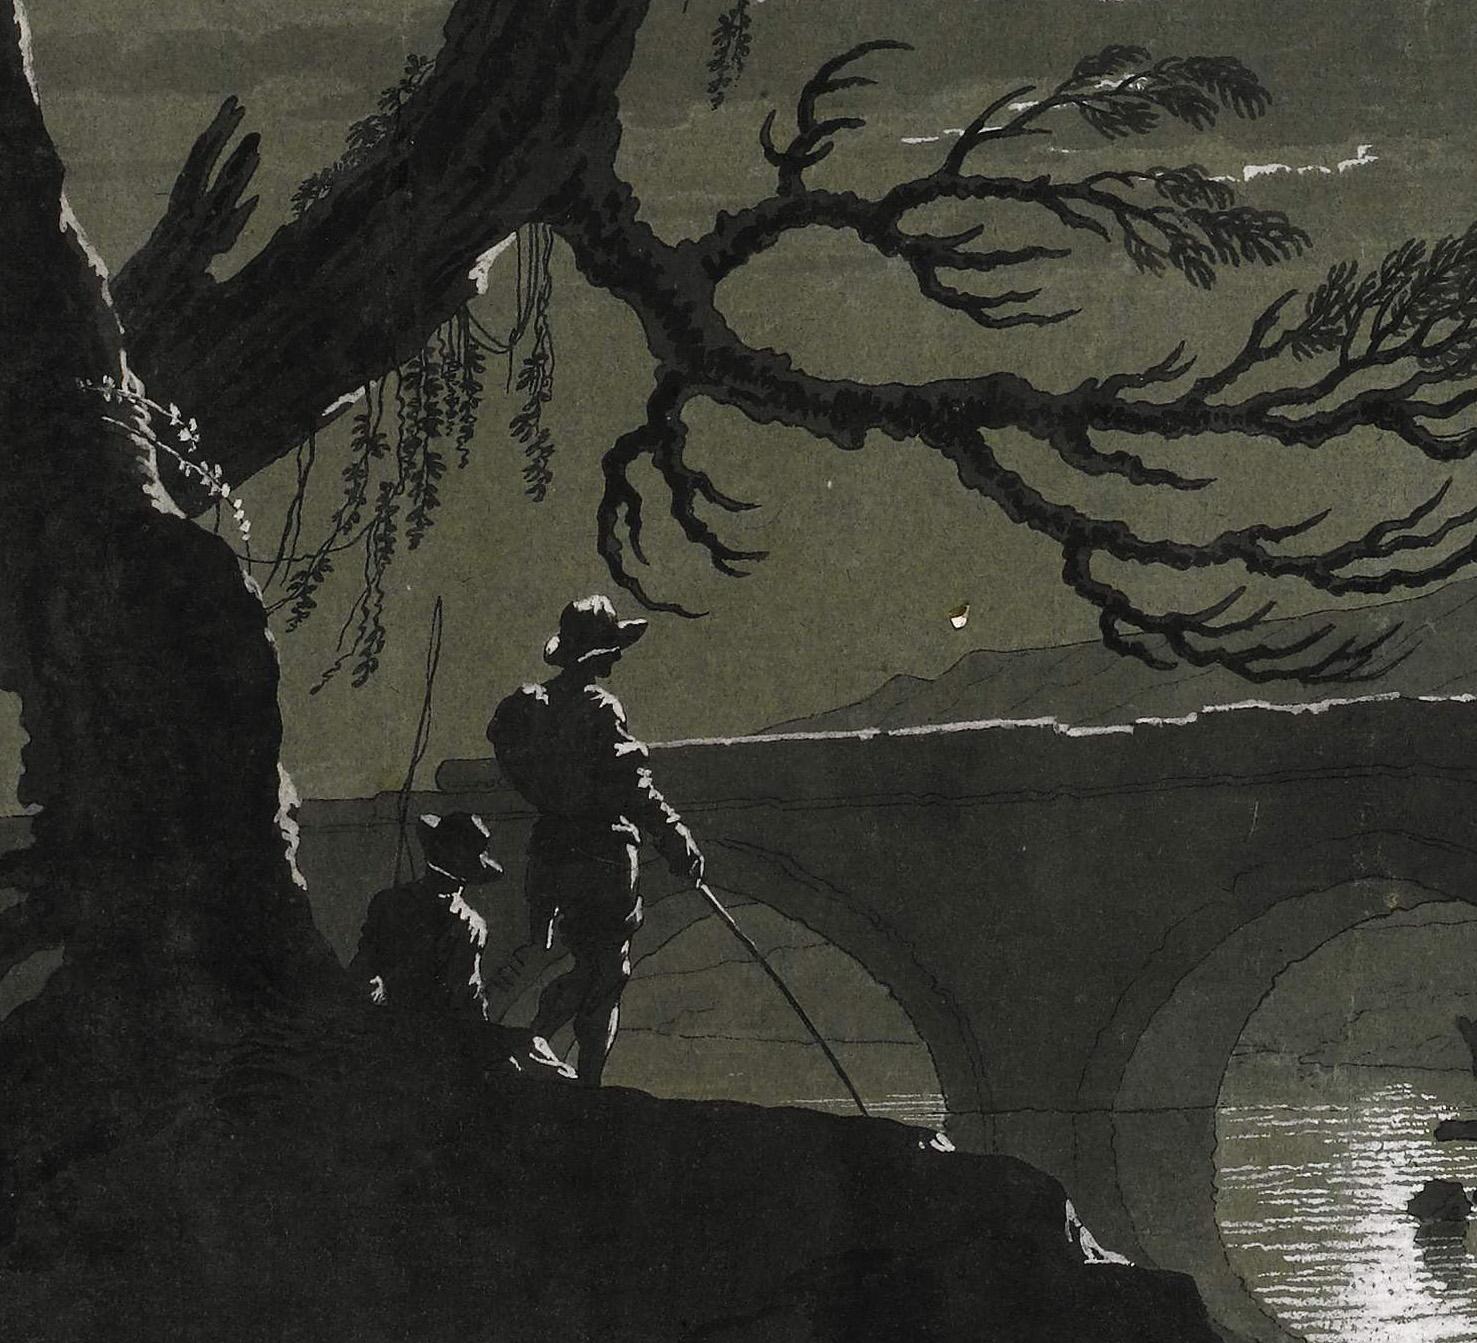 Pietro Giacomo Palmieri (Bologna 1737 – 1804 Turin)

A Moonlit Landscape with Fishermen

Pen and black ink, black and grey wash, heightened with white, over traces of black chalk, on paper prepared green-grey, 475 x 610 mm (18.7 x 24 inch)

Signed